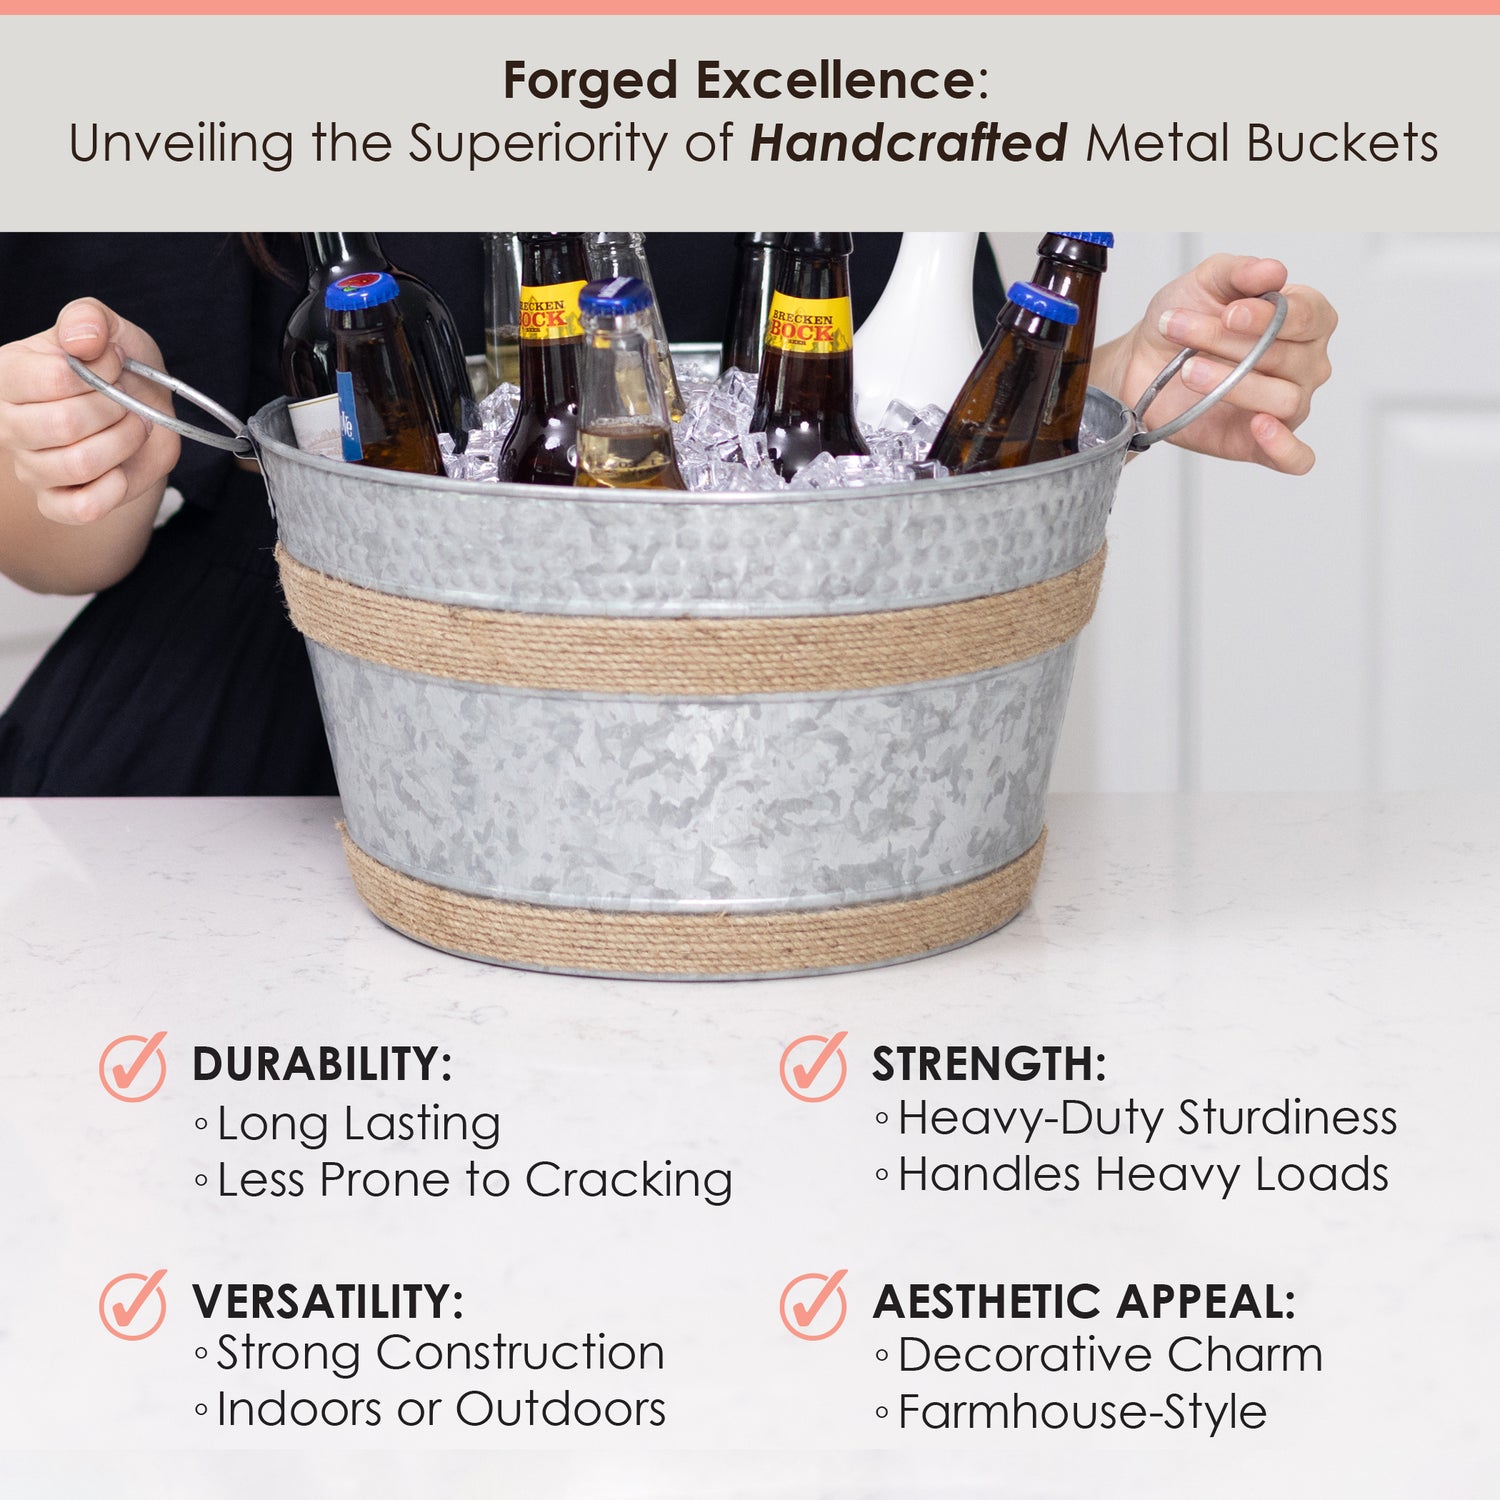 Meet our galvanized large ice bucket – a durable and long-lasting solution for all your chilling needs! Crafted to resist cracking, this bucket offers robust performance and heavy-duty sturdiness, capable of handling substantial loads of ice. Whether used indoors or outdoors, its versatility knows no bounds. Beyond its practicality, the bucket adds a decorative charm with its galvanized finish, making it a stylish accent for any setting. 